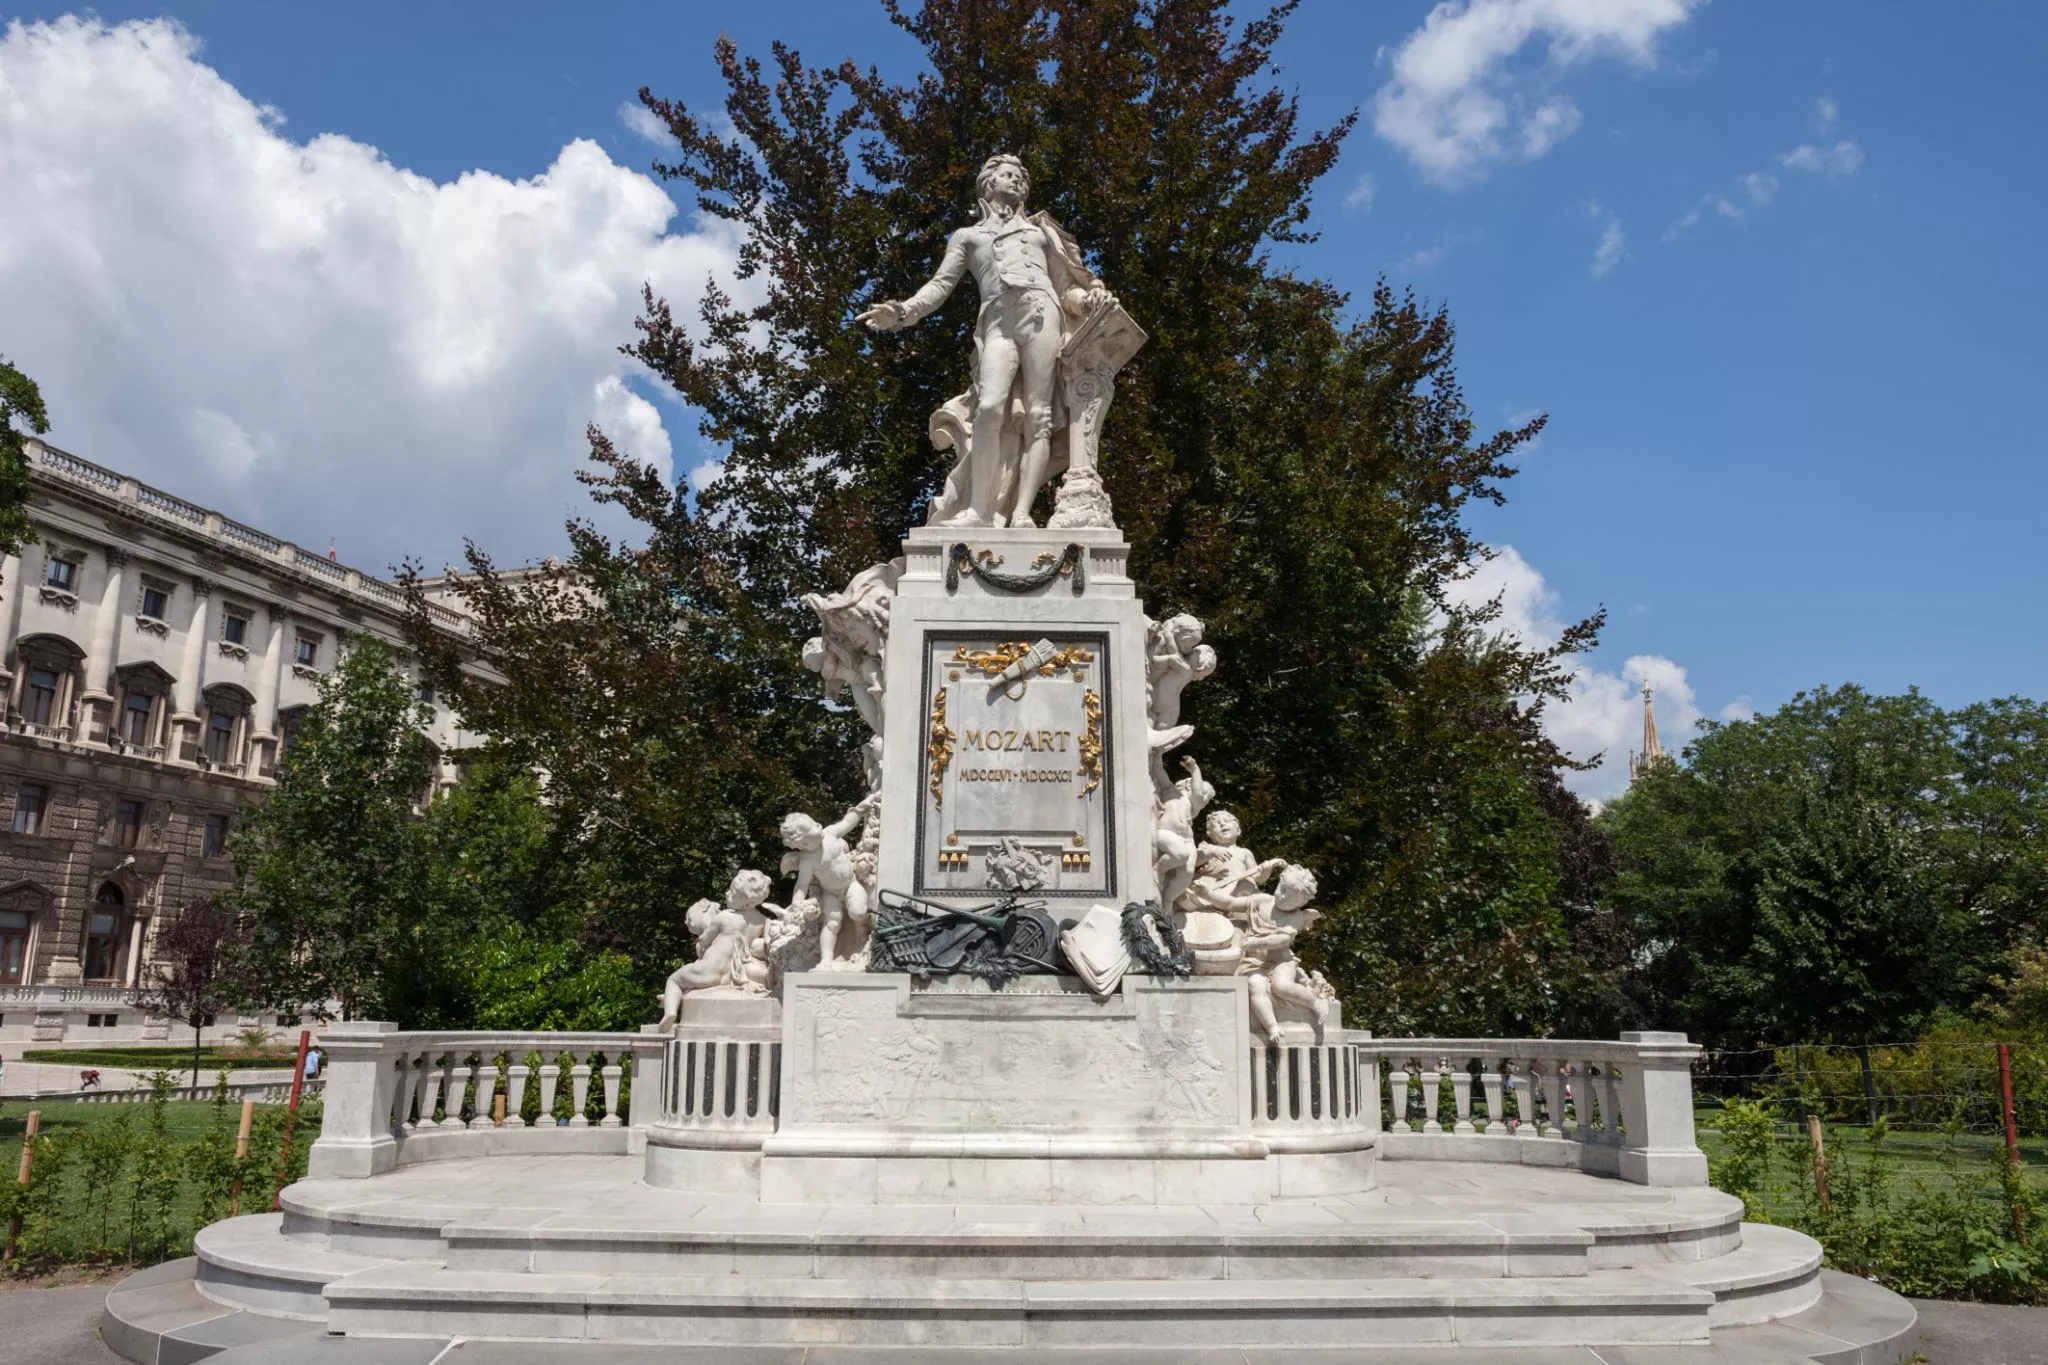 Mozart Monument in Austria, Europe | Monuments - Rated 3.8